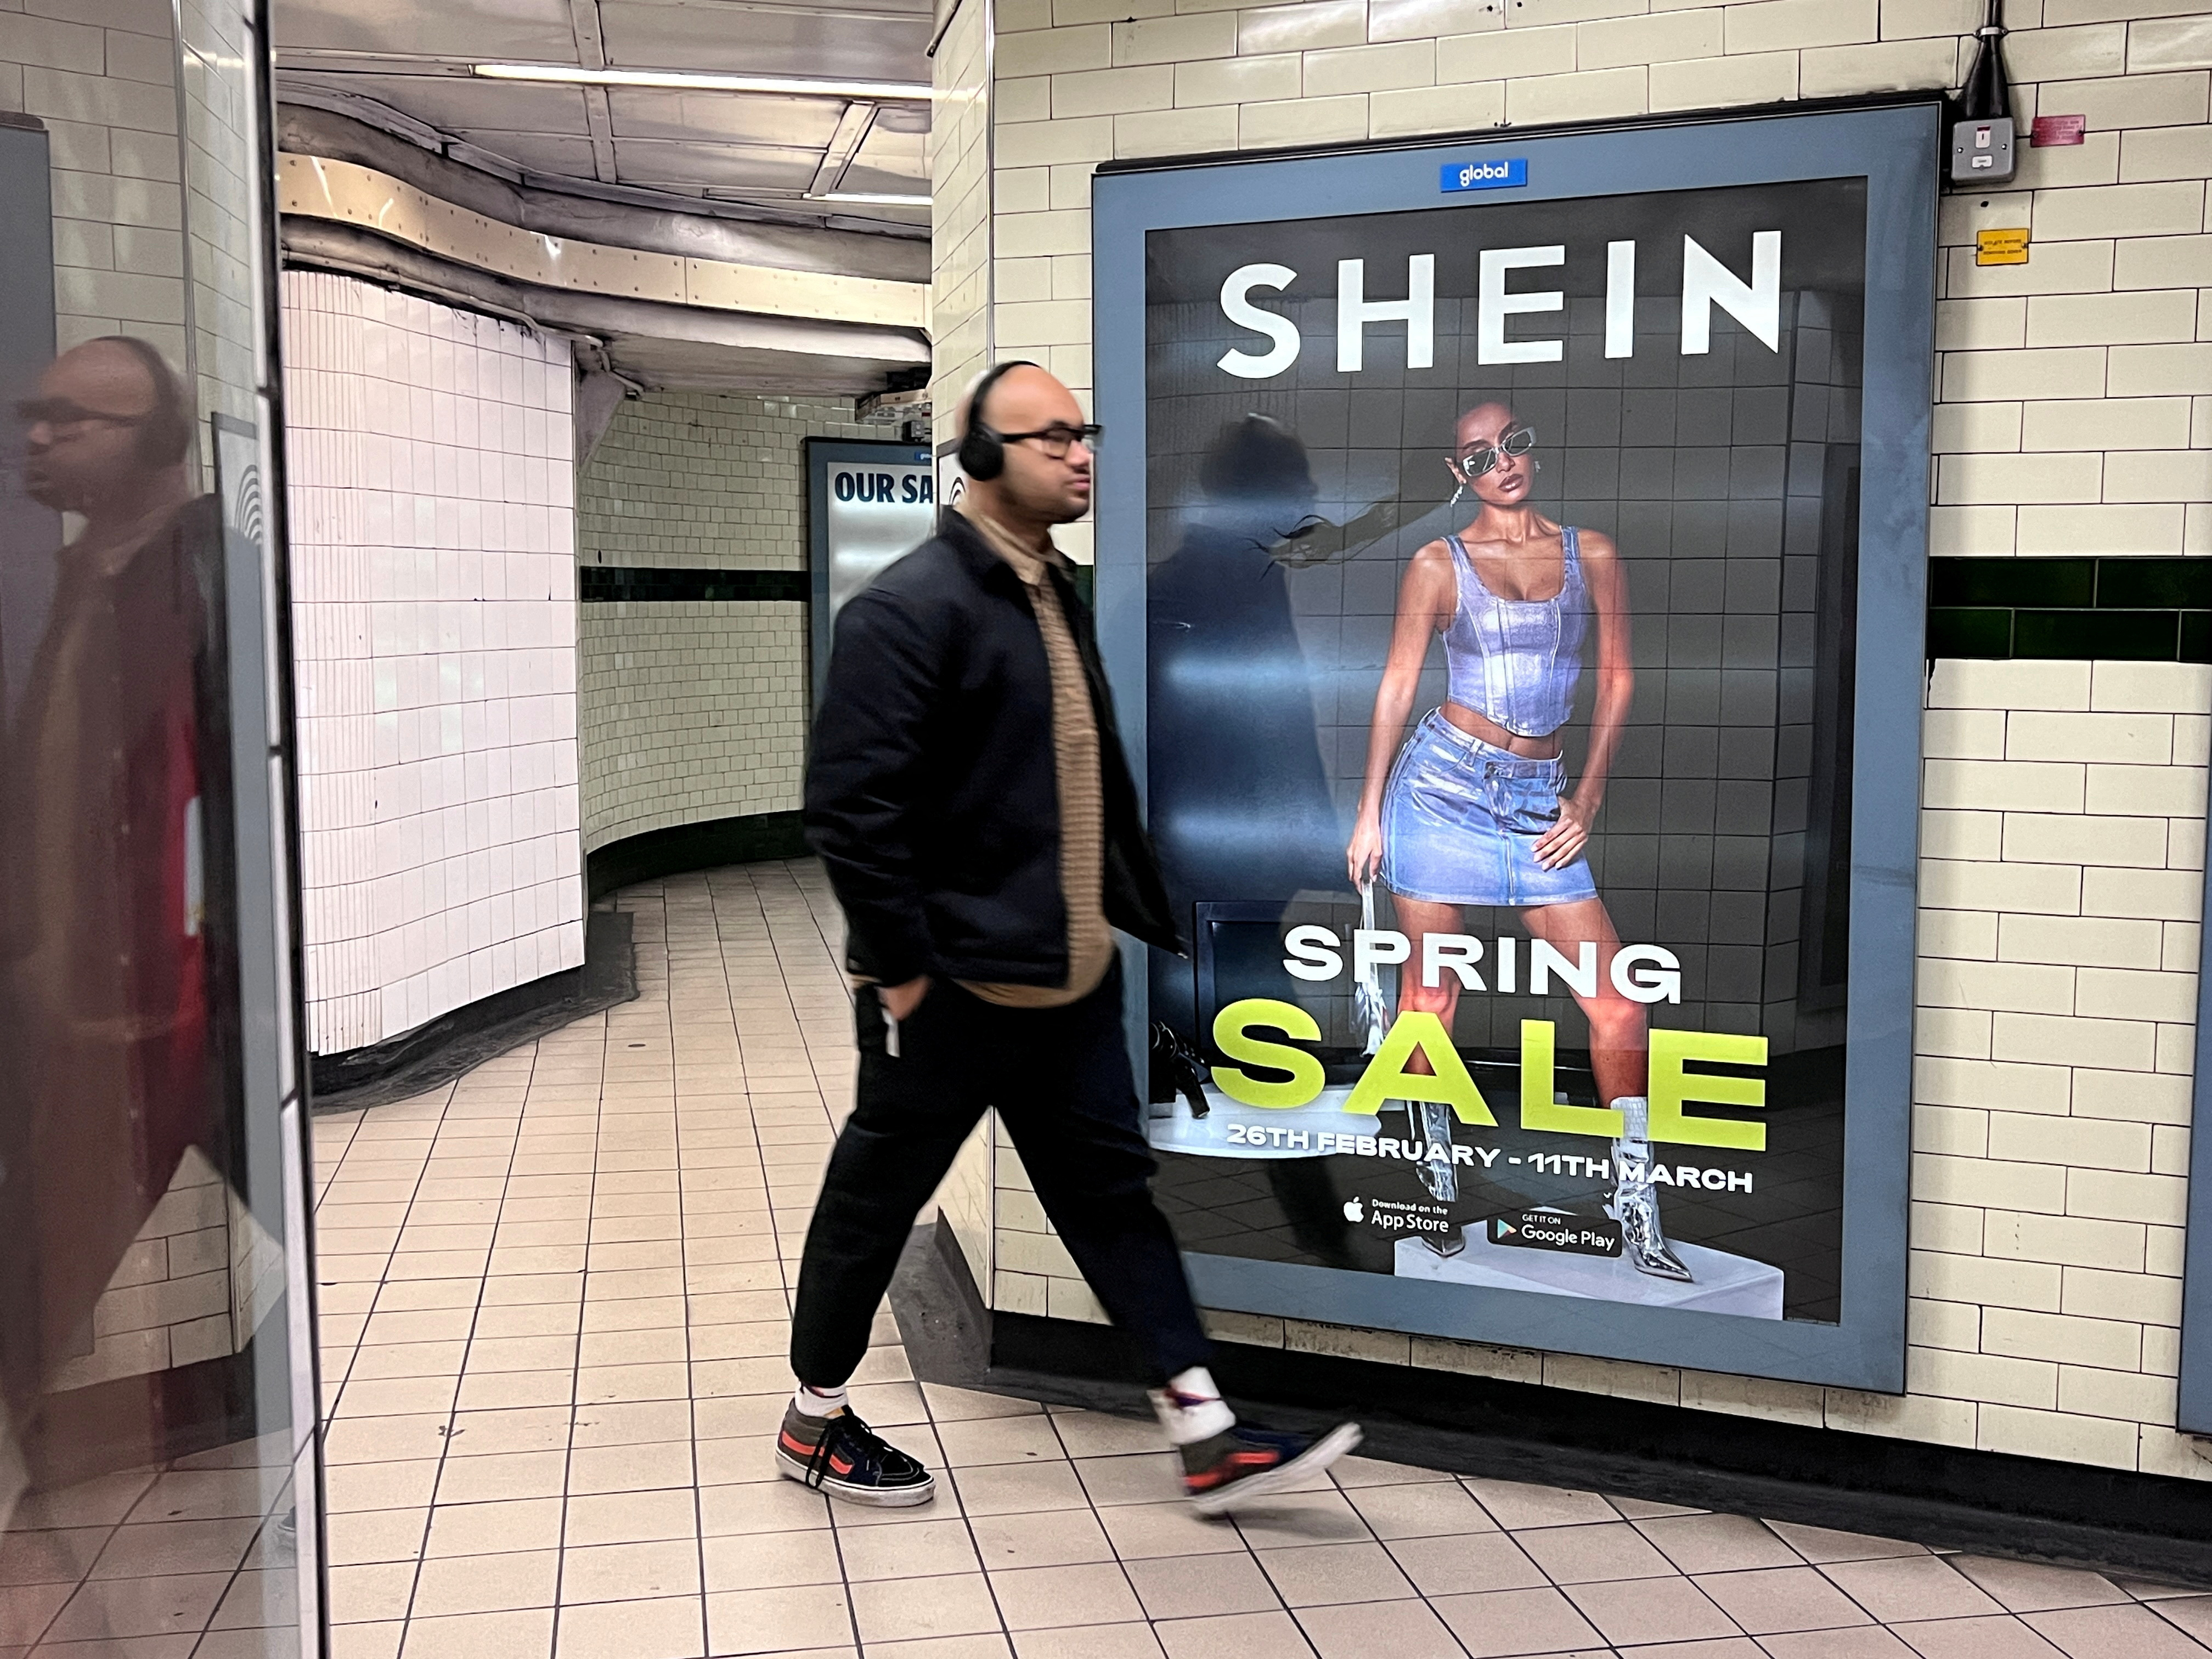 People walk past an advertisement for Shein